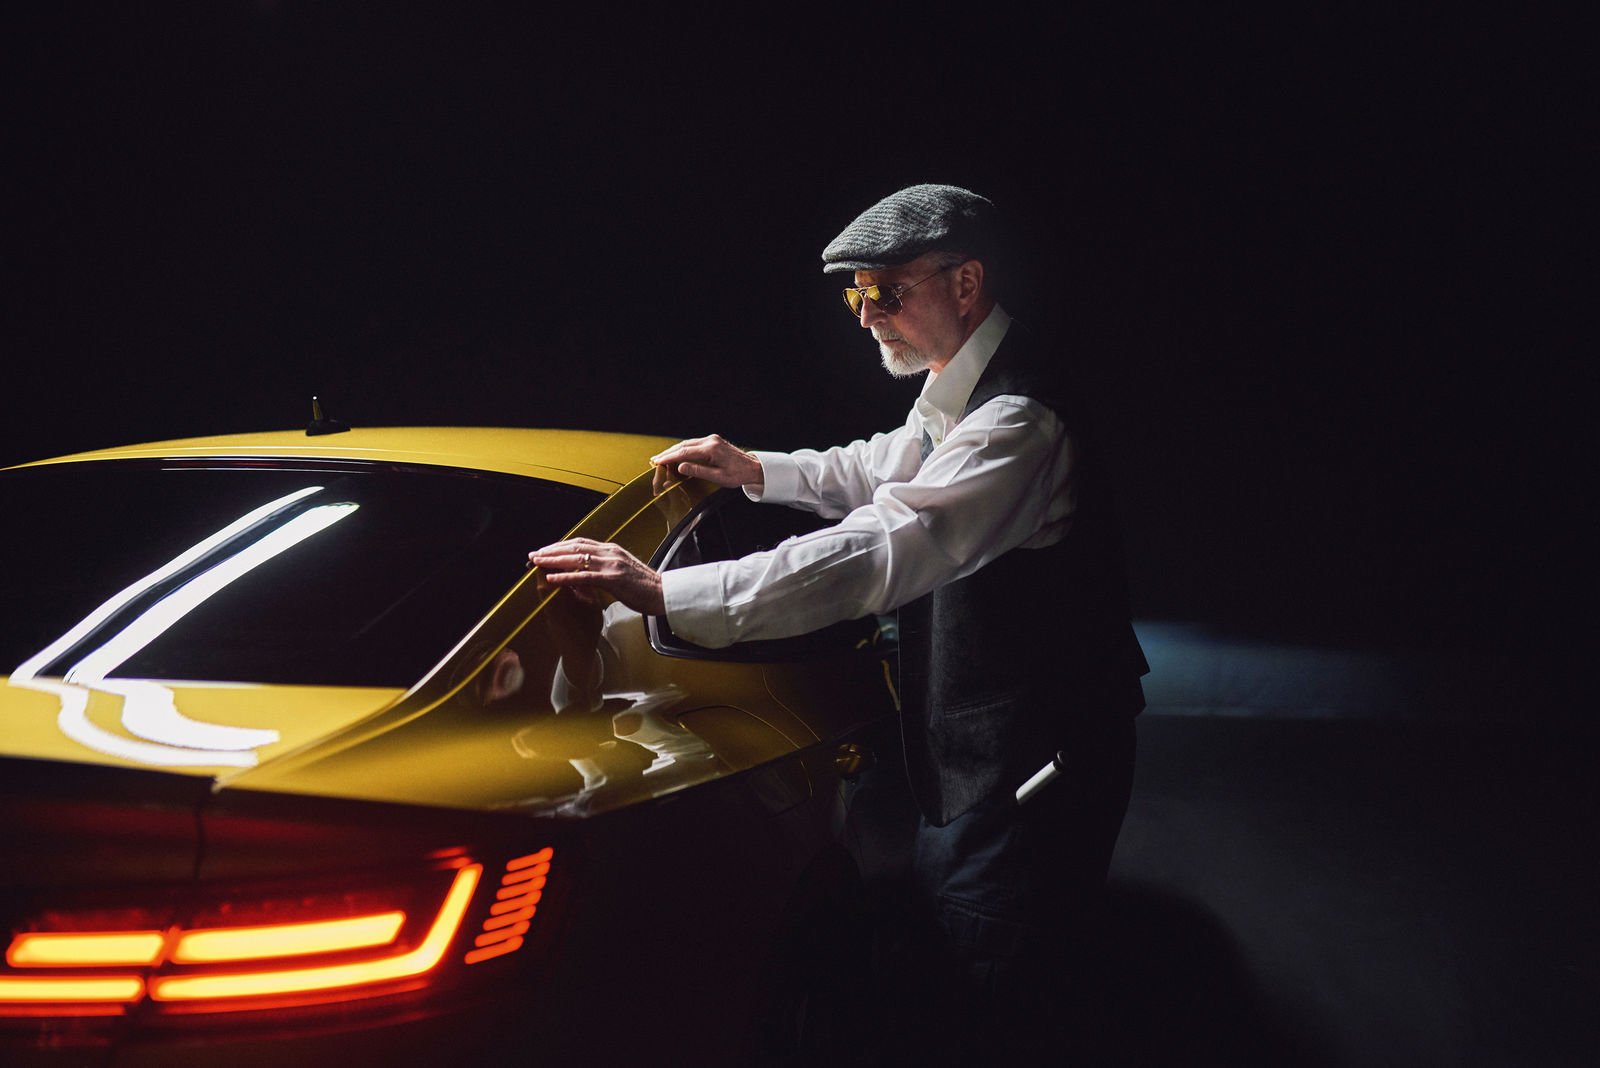 "You don't need eyes to see beauty" – Blind photographer Pete Eckert presents new Volkswagen Arteon with unique images